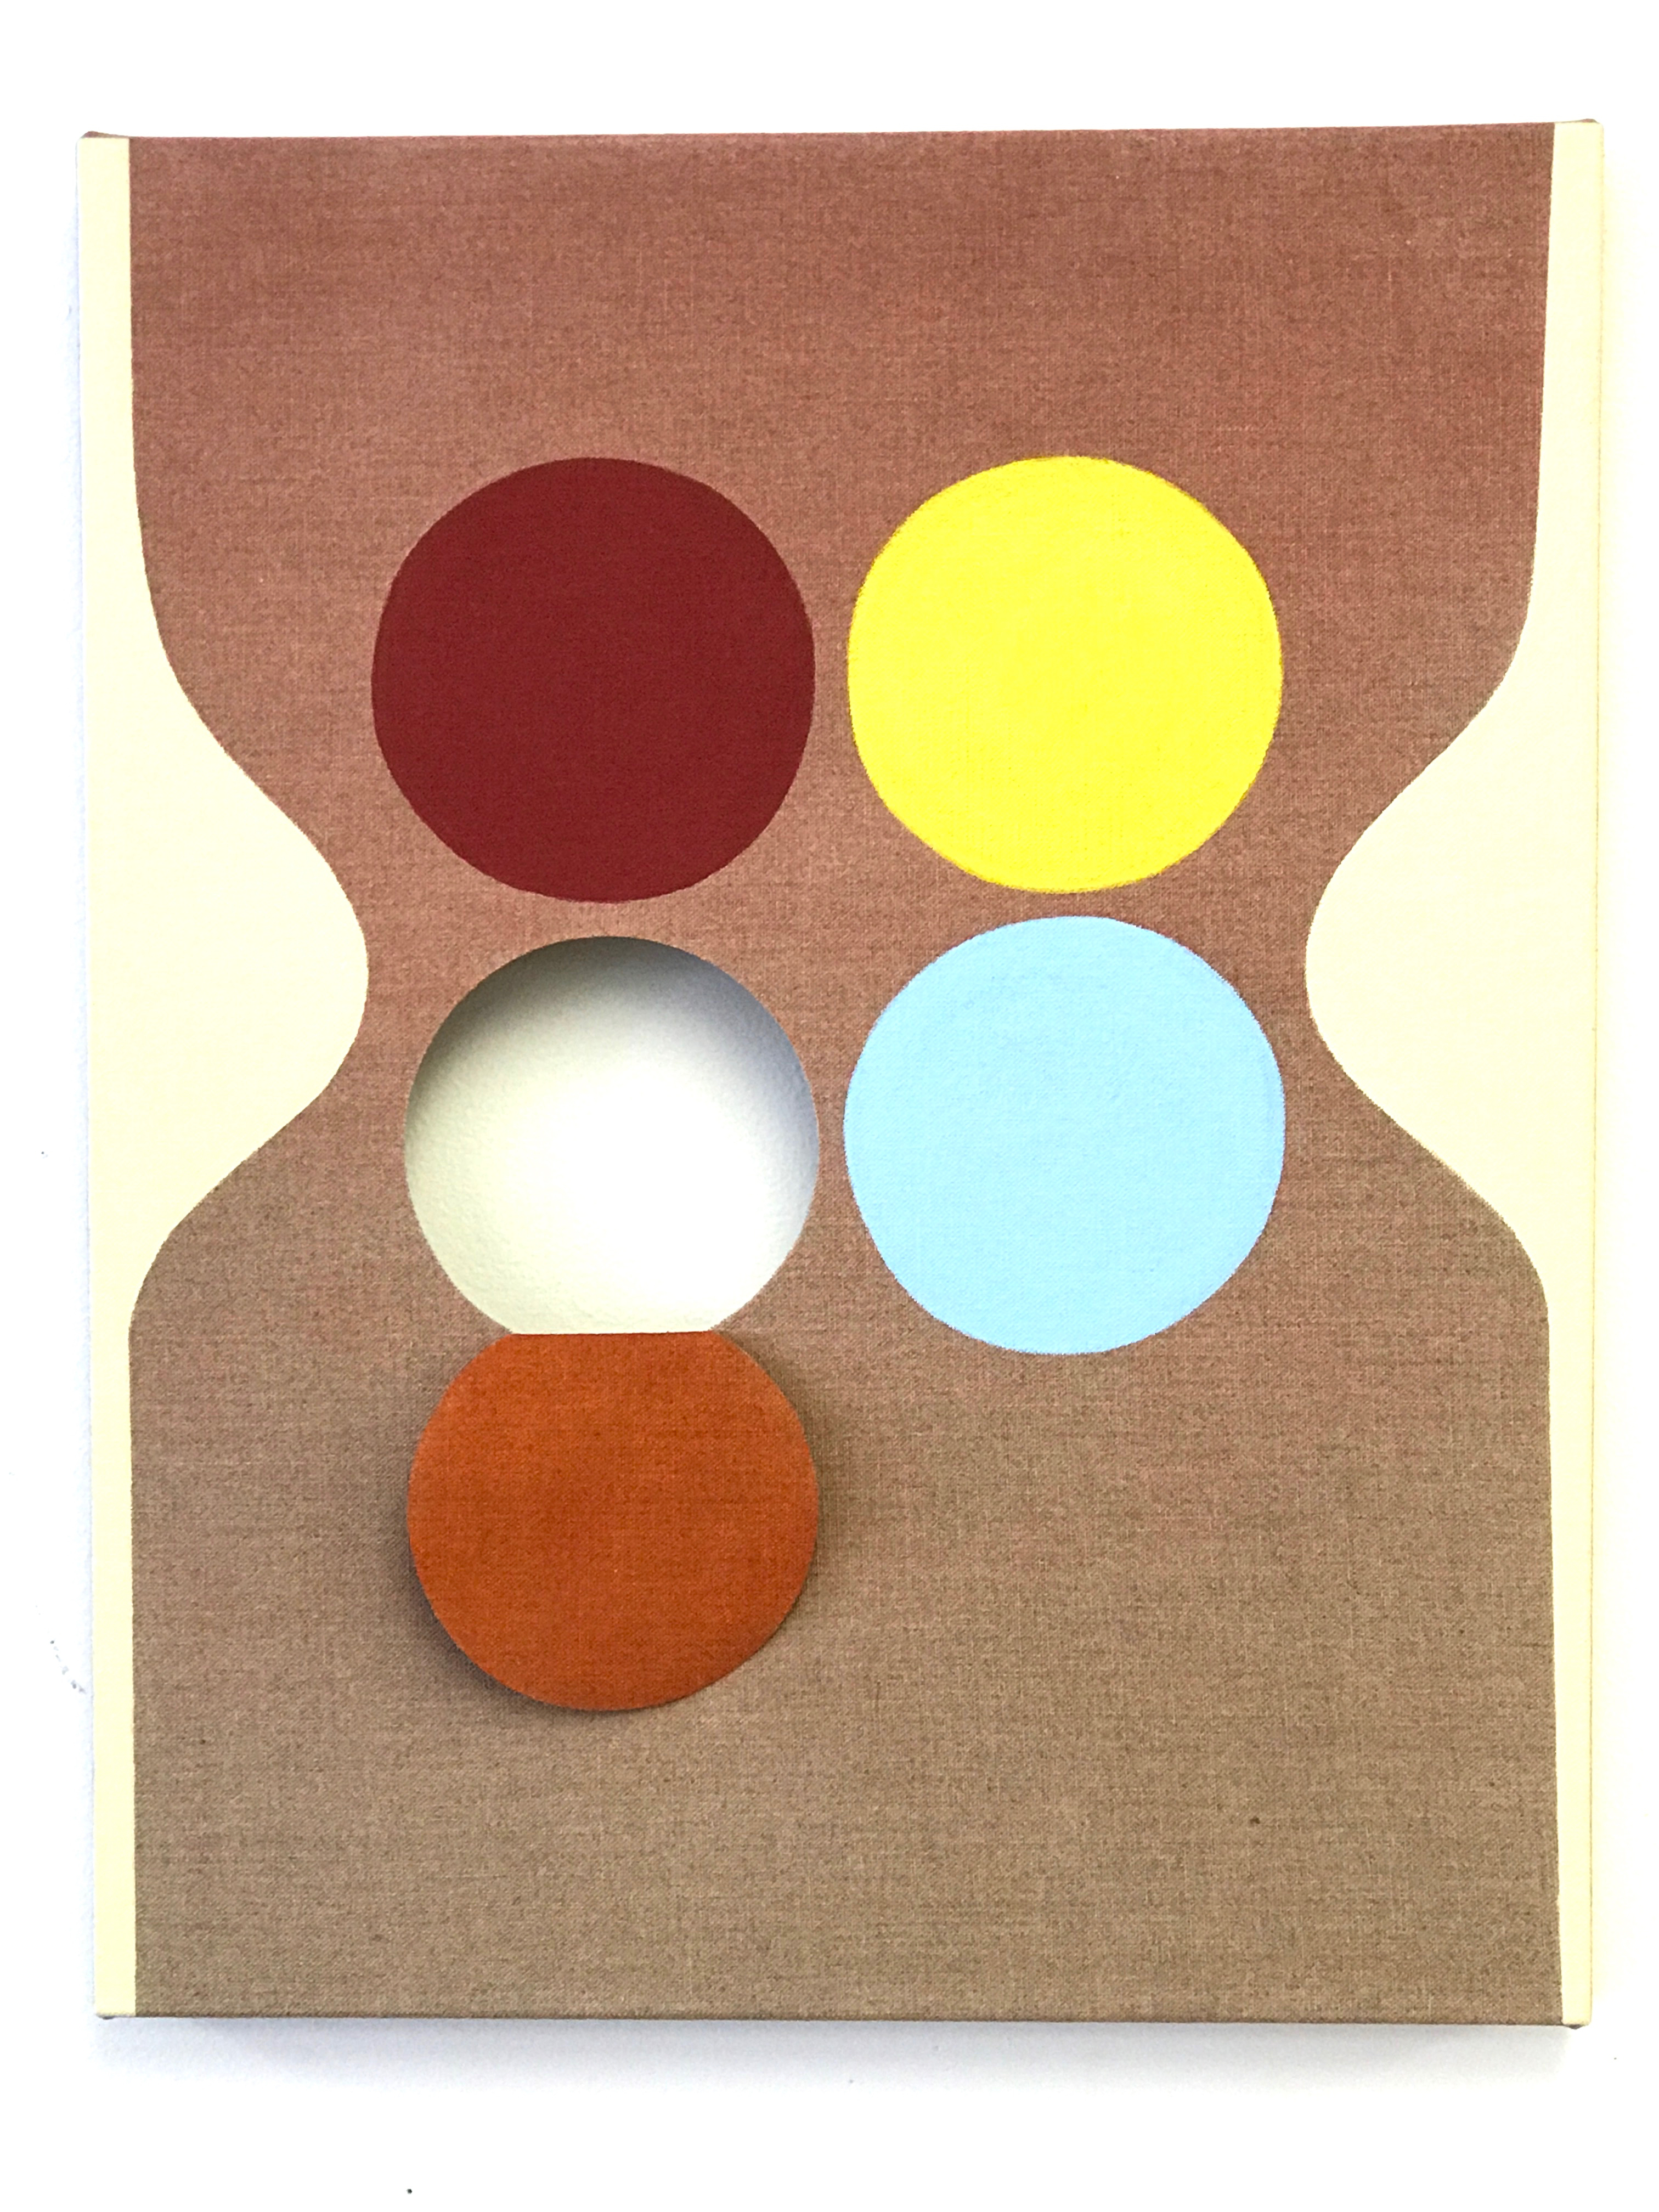 Linda King Ferguson, Equivalence 76, oil, acrylic, and acrylic stain on cut stretched linen, 20” x 16”, 2020